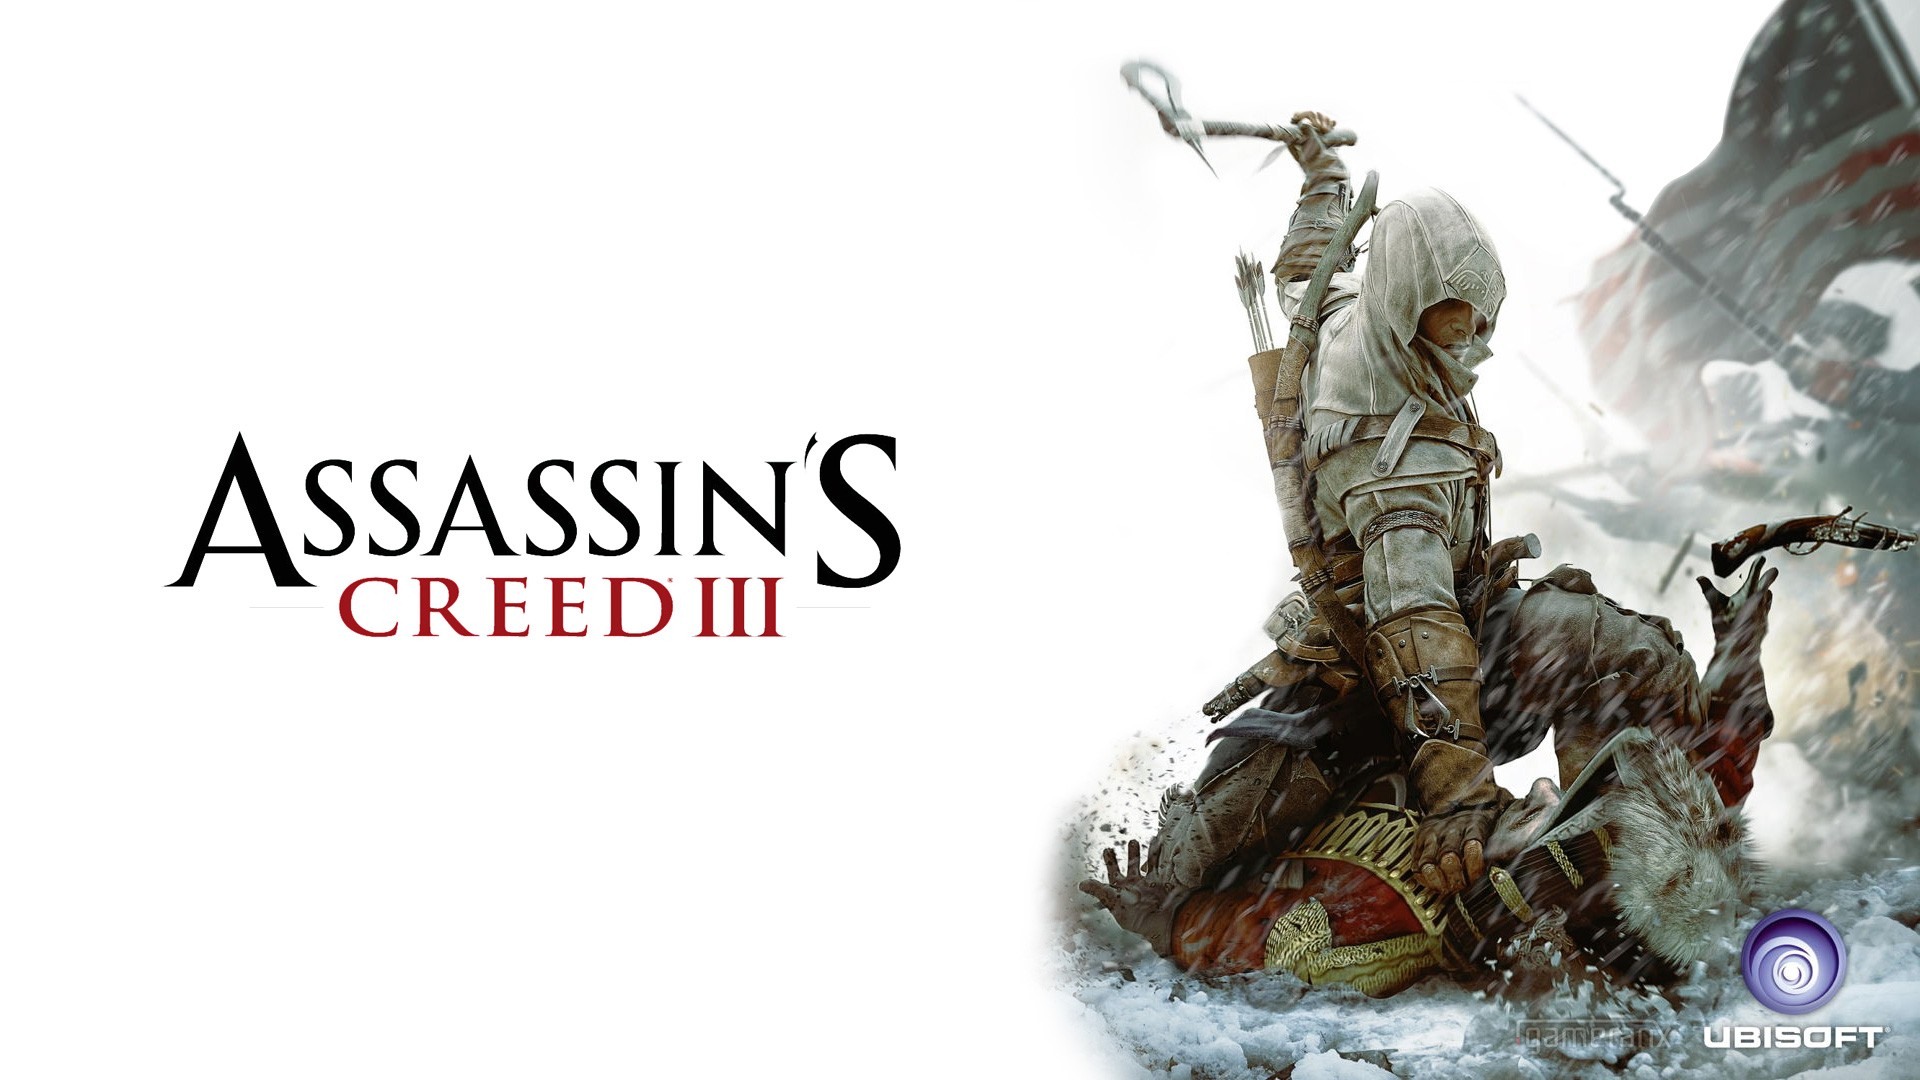 Assassin's Creed 3 HD wallpapers #13 - 1920x1080